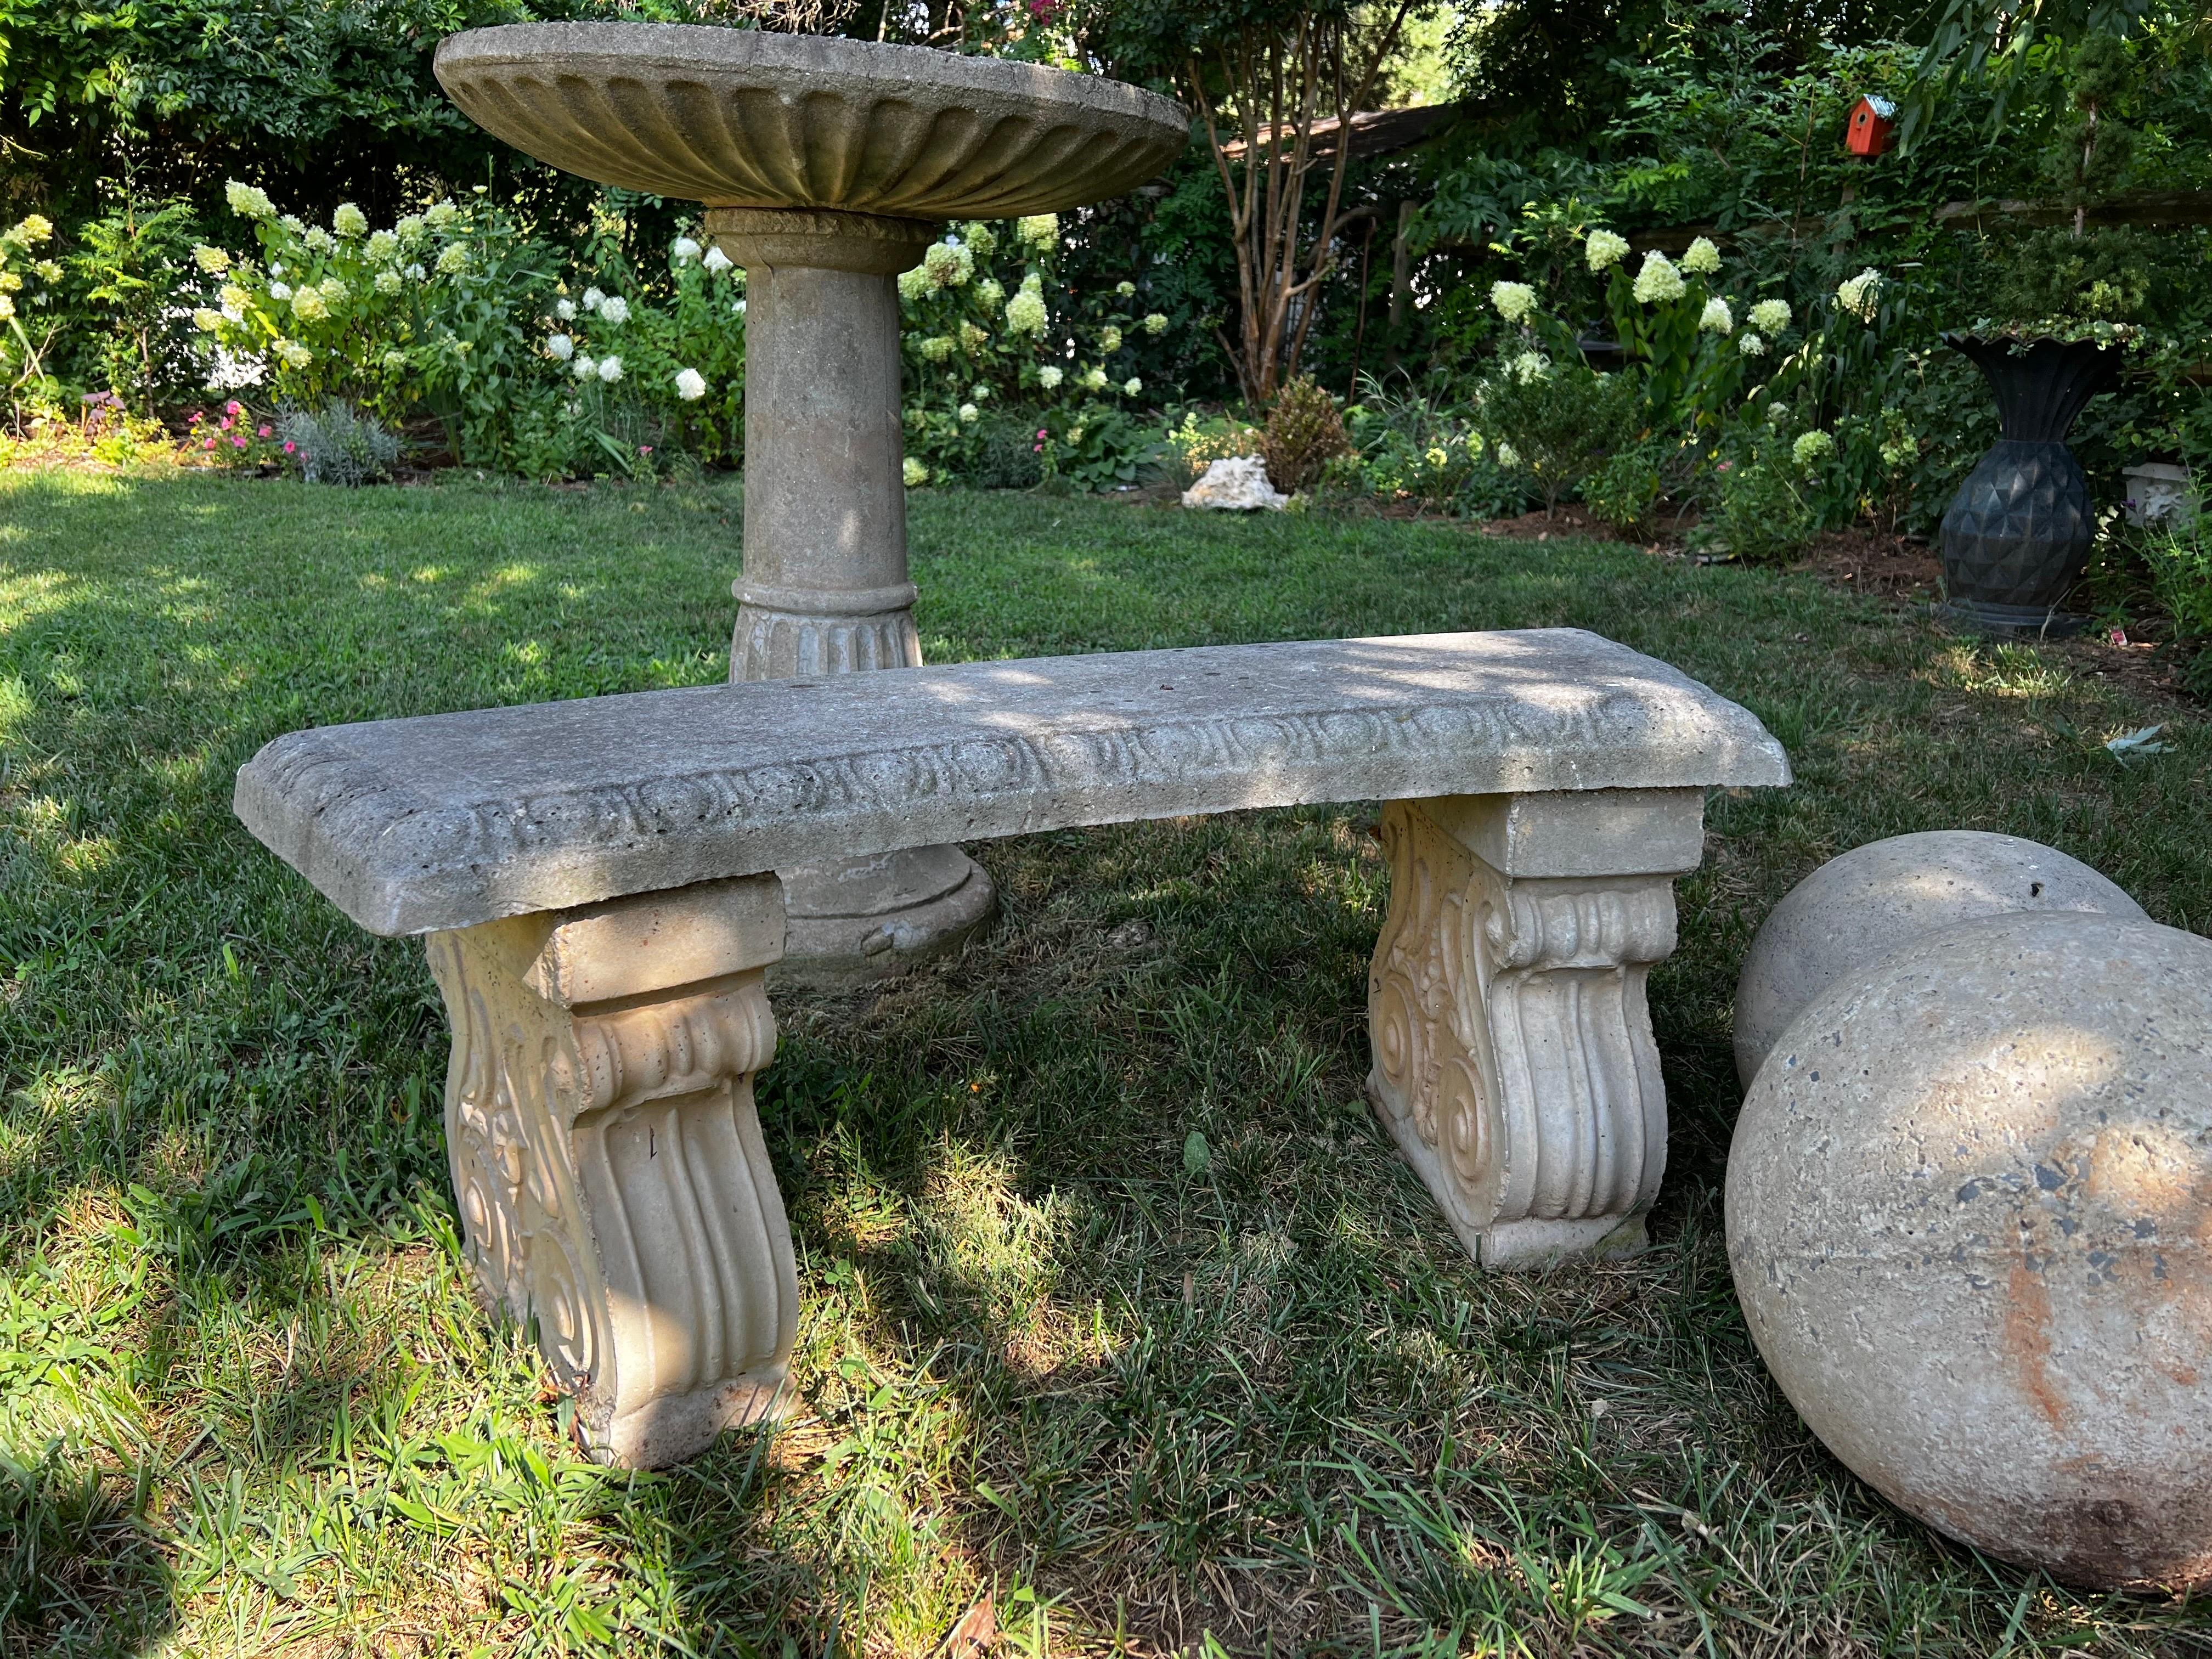 Cast stone garden bench. Slight curve seat sits on two pedestals with carvings.
Beautiful aged patina adding elegance to any garden space or entrance. 

See pictures for details. Measurements in listings.